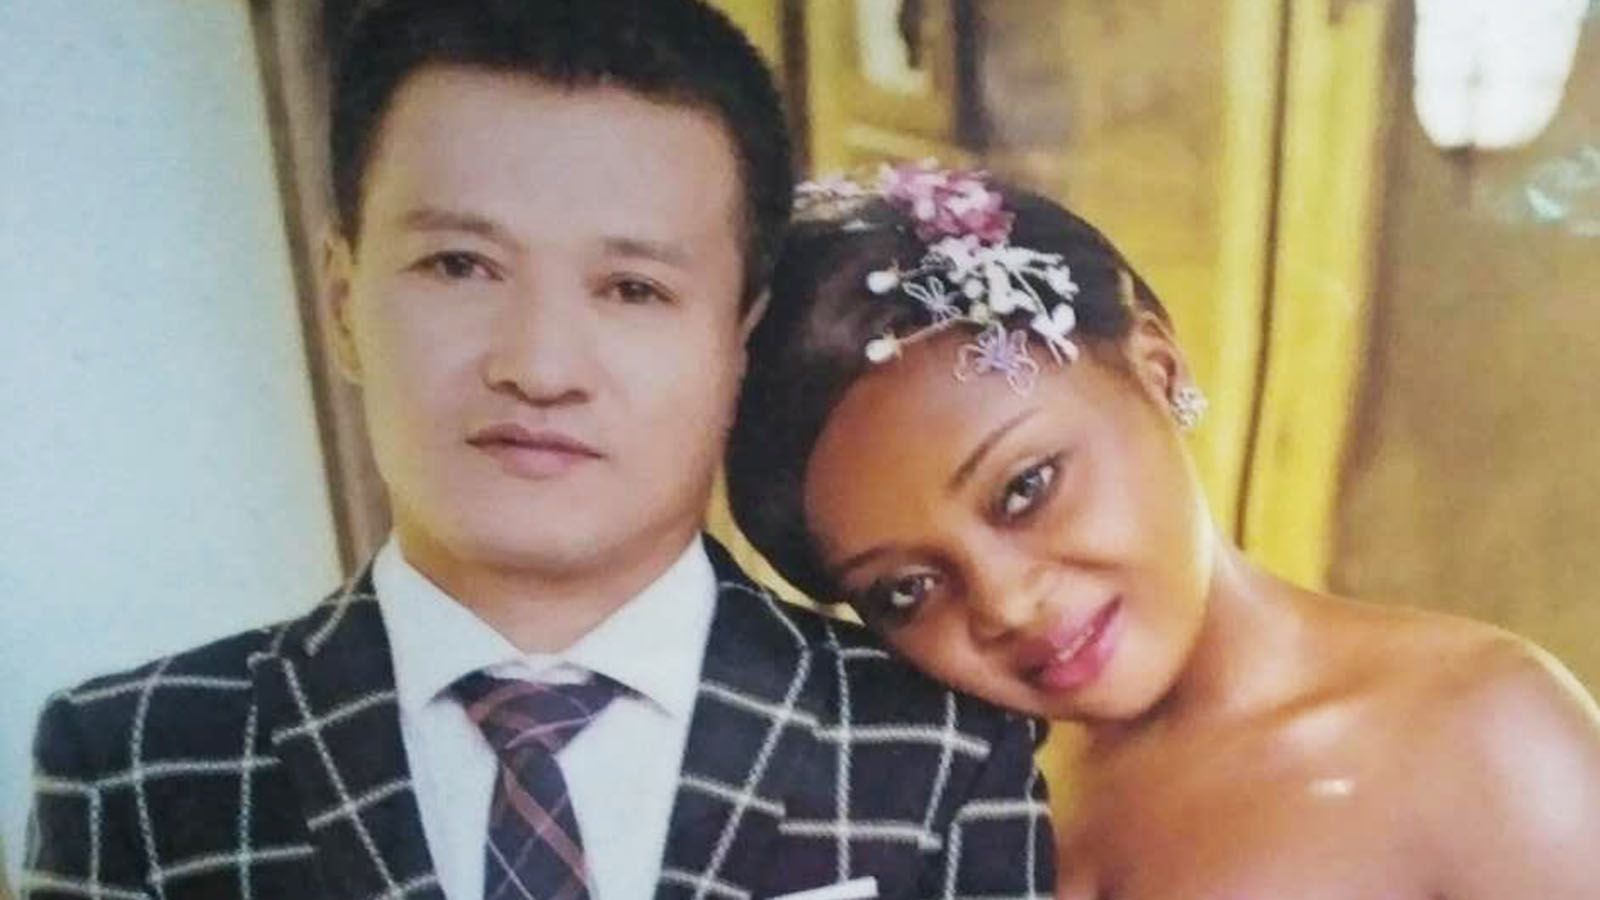 Cameroon-Chinese newlyweds find fame in China | CNN